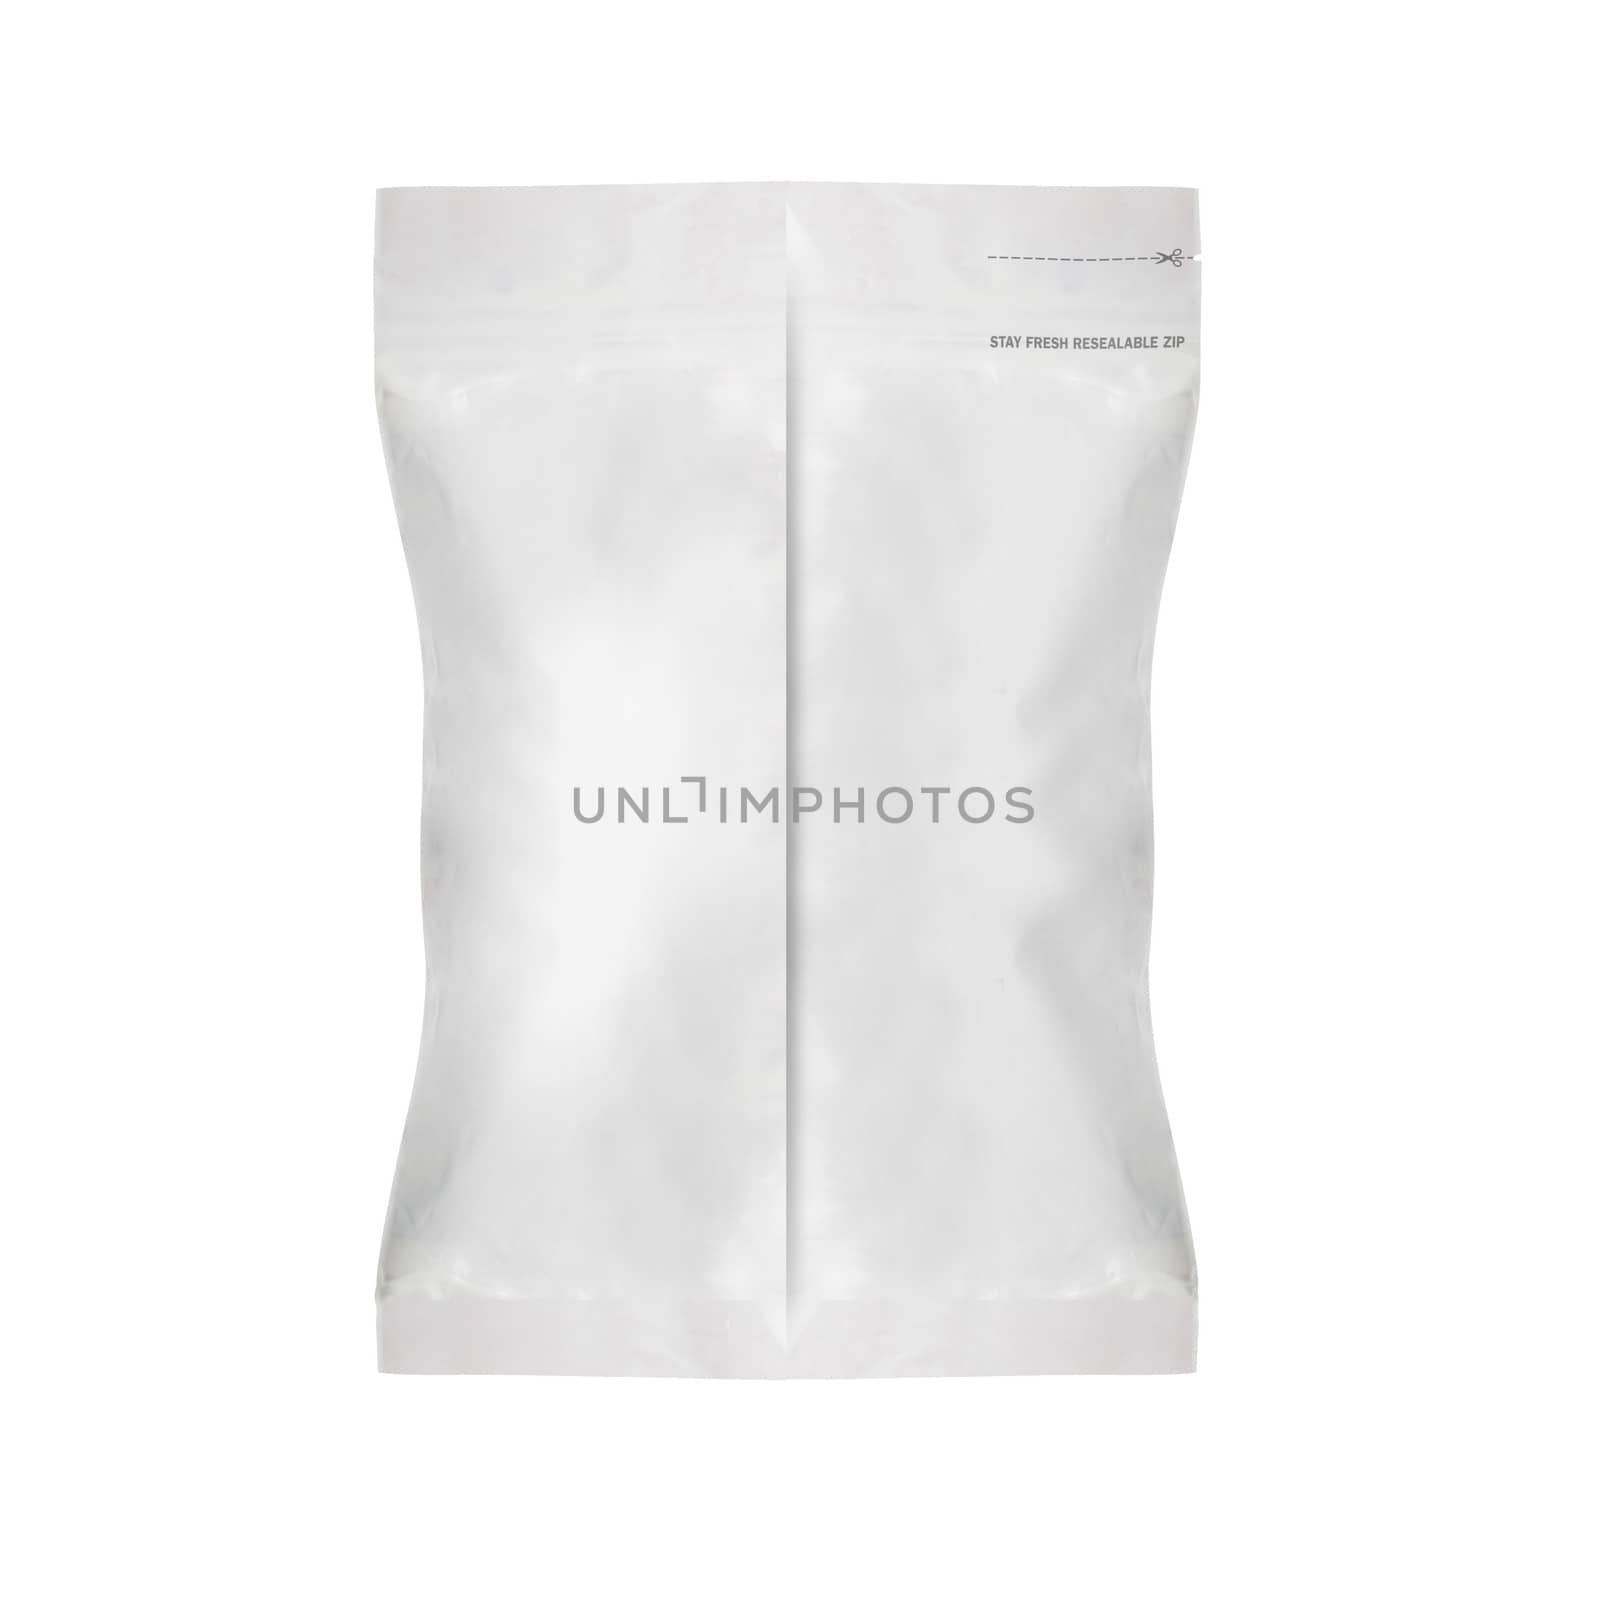 White Blank Foil Food Bag Packaging For Pepper, Spices, Sachet, Chips. Plastic Pack Template Ready For Your Design. (with clipping work path)